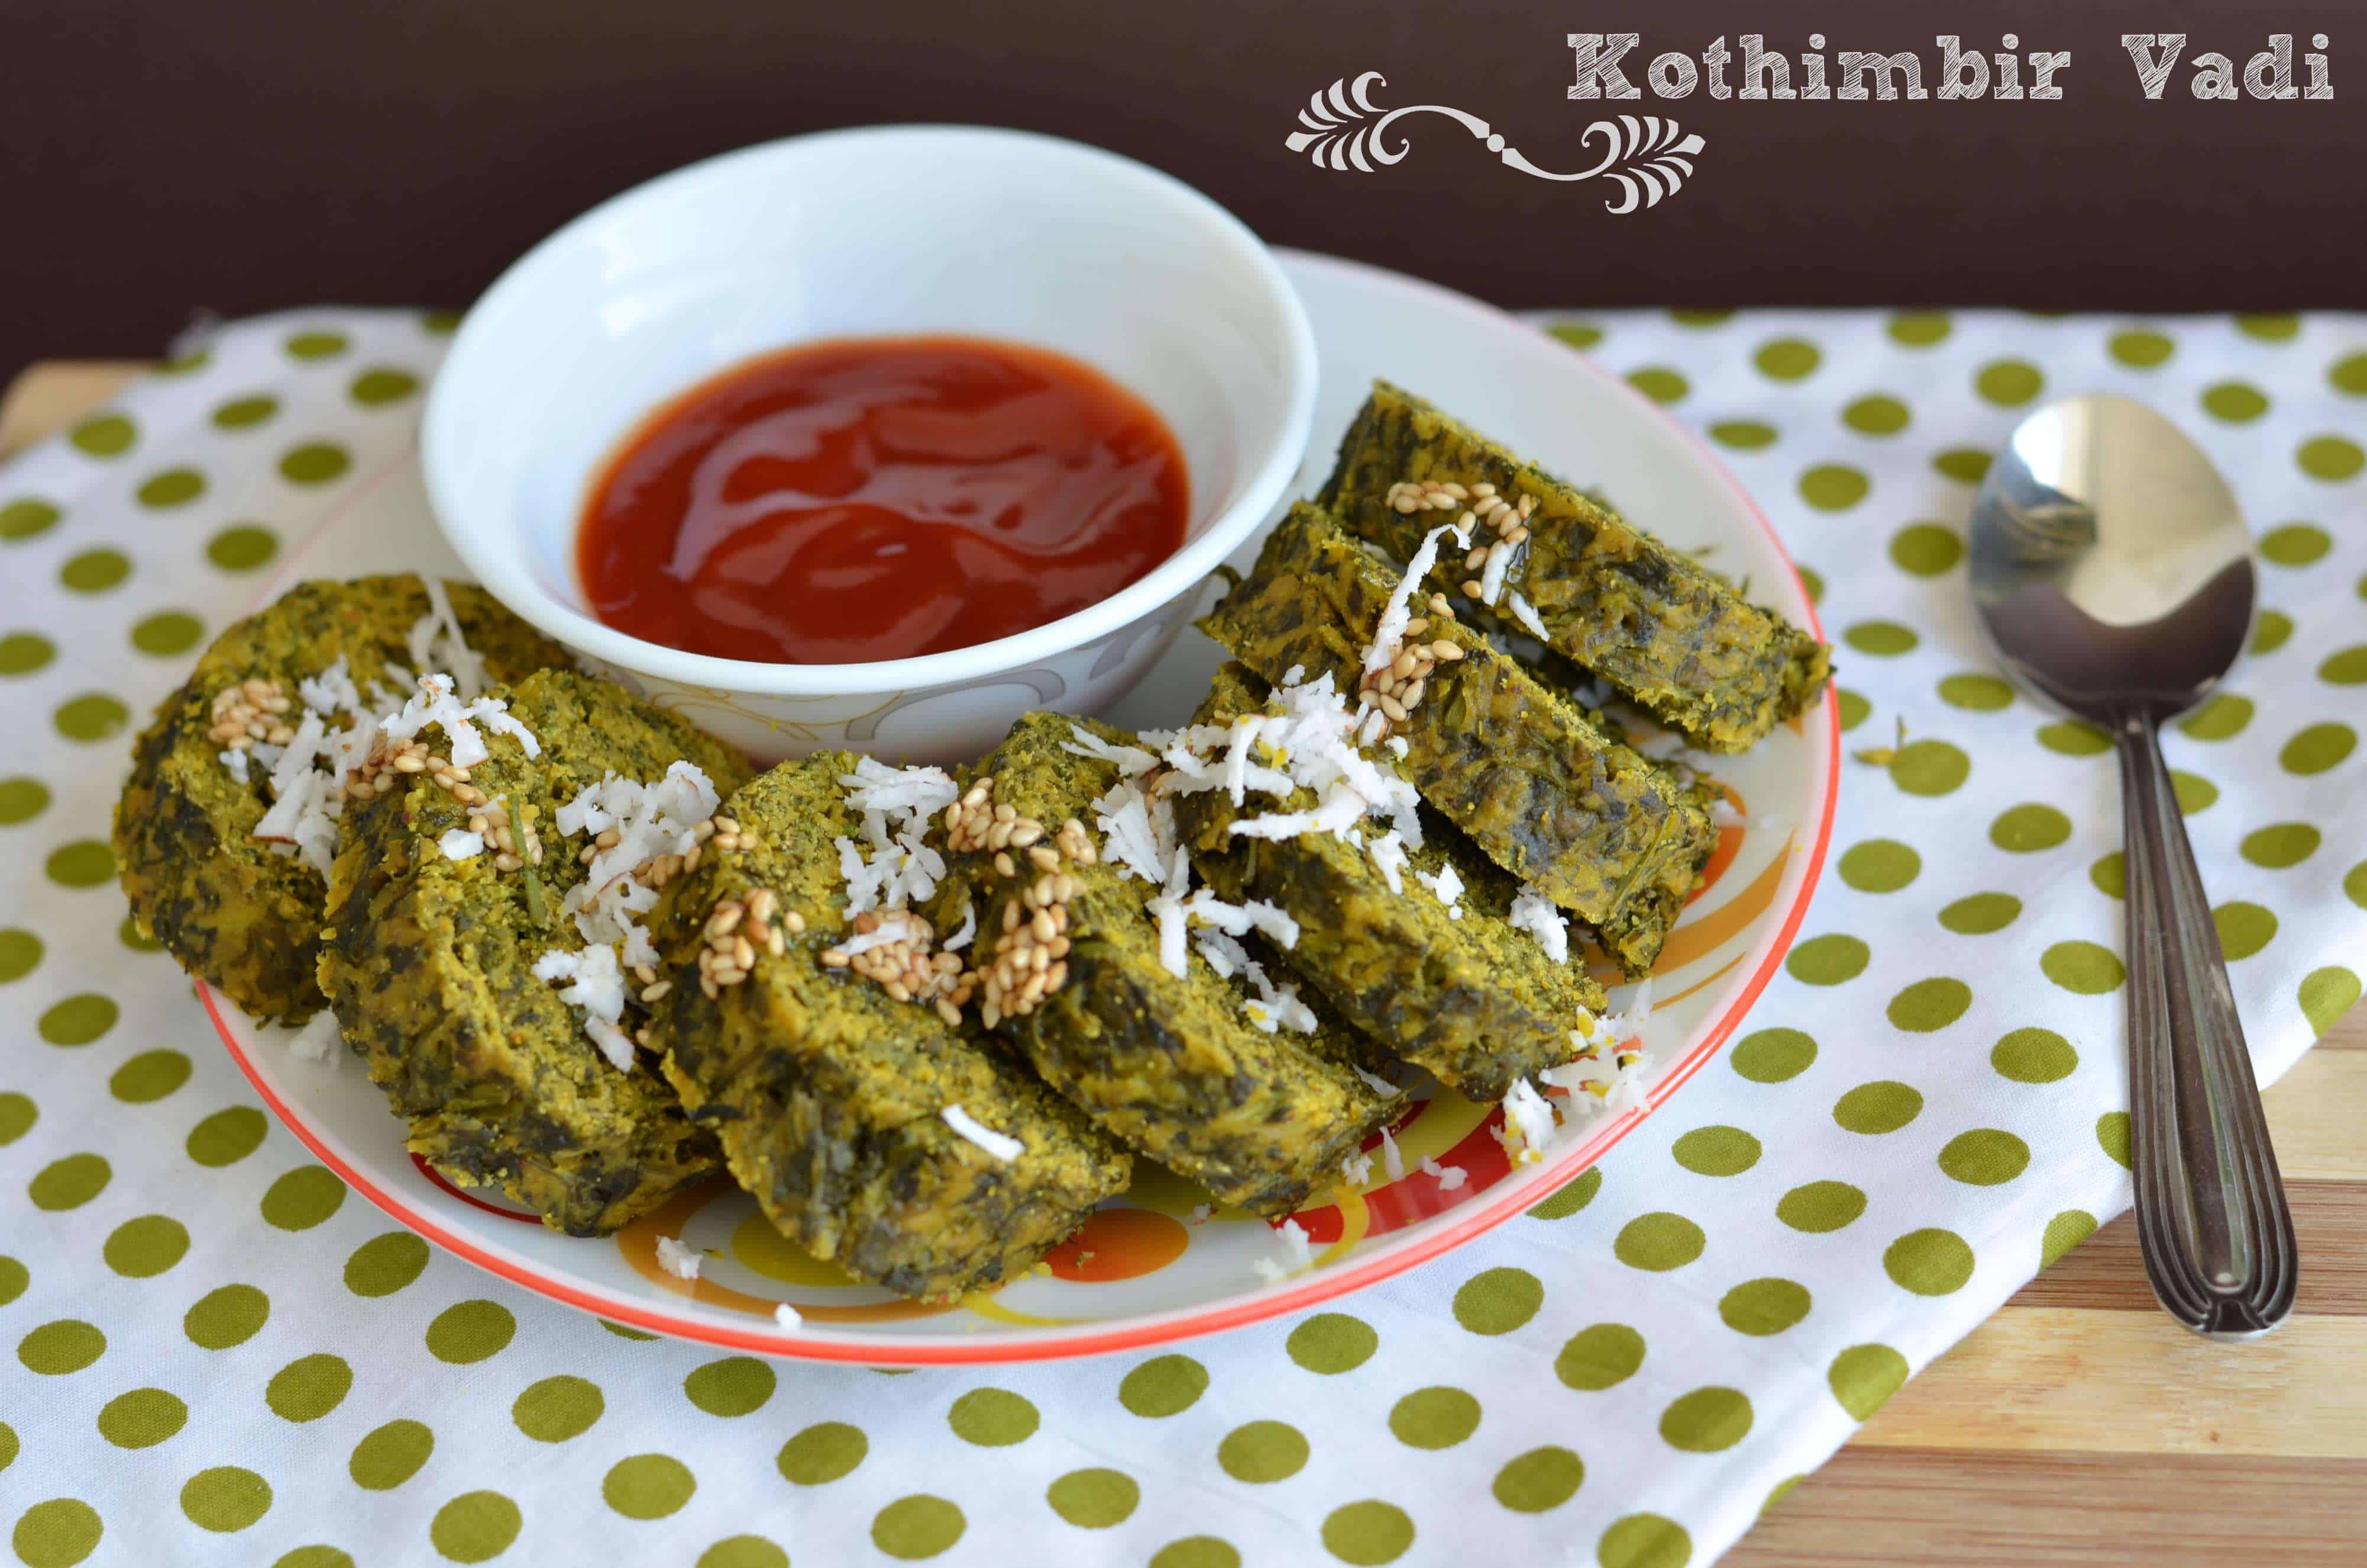 Kothimbir Vadi is a popular Maharashtrian snack which is steamed and pan-fried. It is made with fresh coriander leaves, chickpea flour, spiced up using ginger, garlic, green chili, garam masala. Kothimbir Vadi is a glutenfree snack, you can have it in breakfast or a side dish in the Maharashtrian thali. 